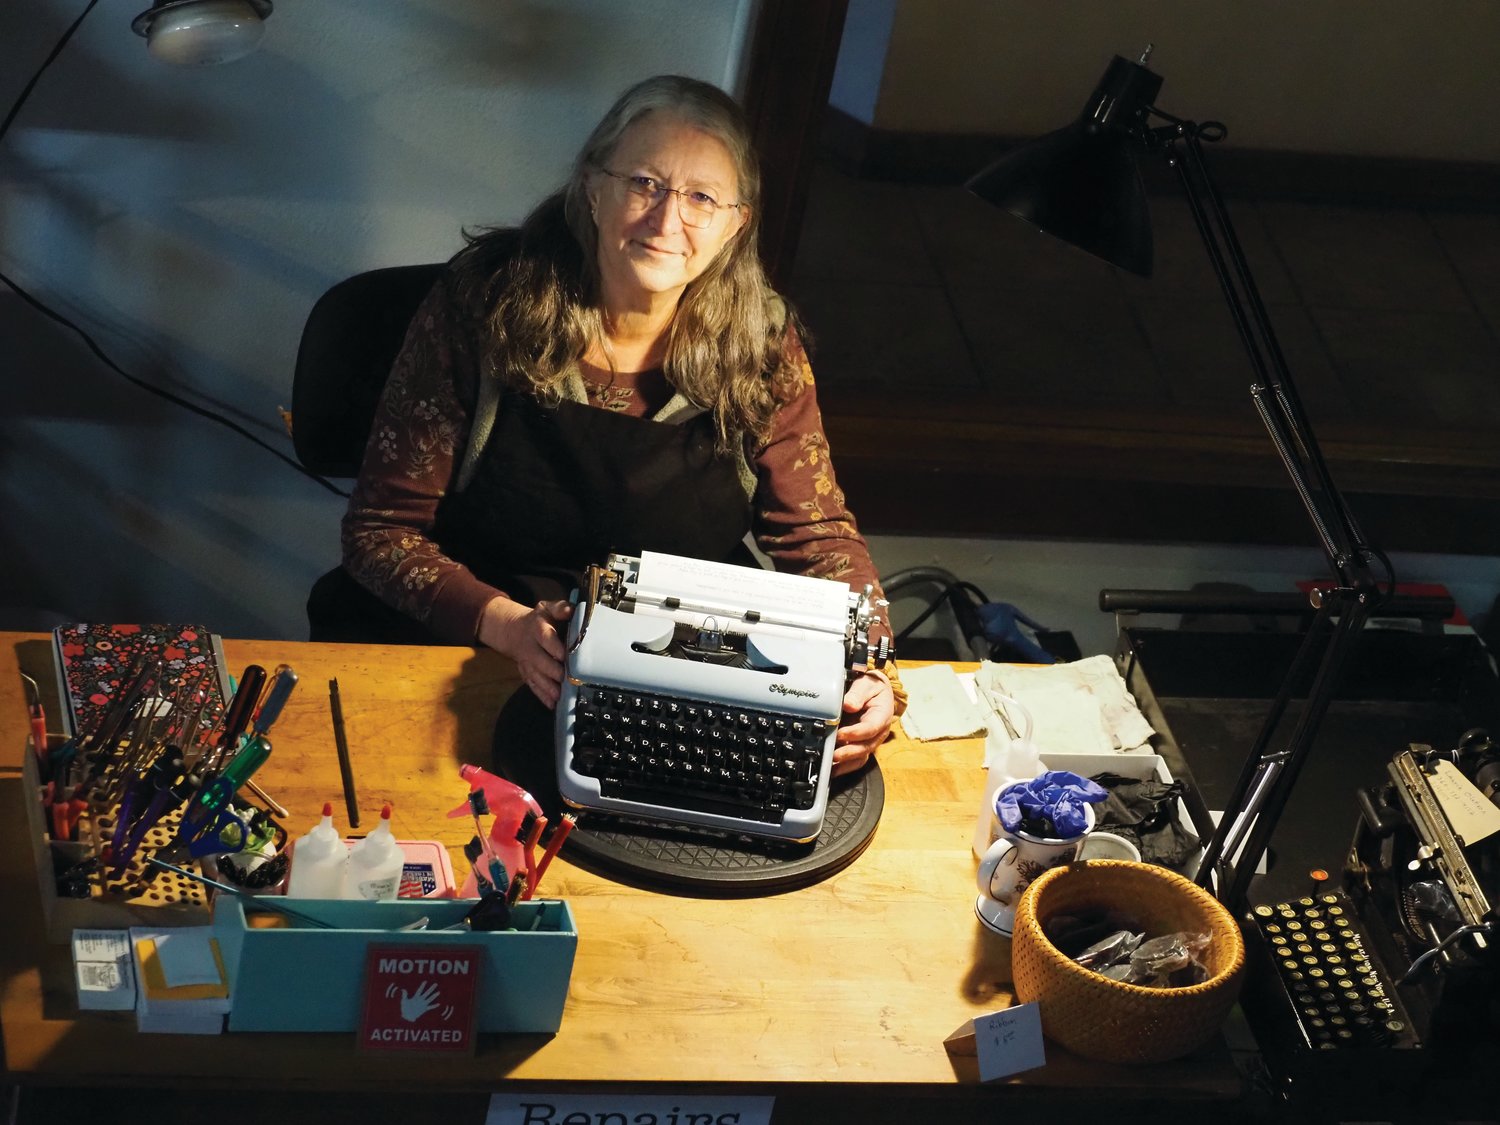 Shop owner Shelley French says her favorite typewriters are Olympias: “Because they’re a workhorse.”